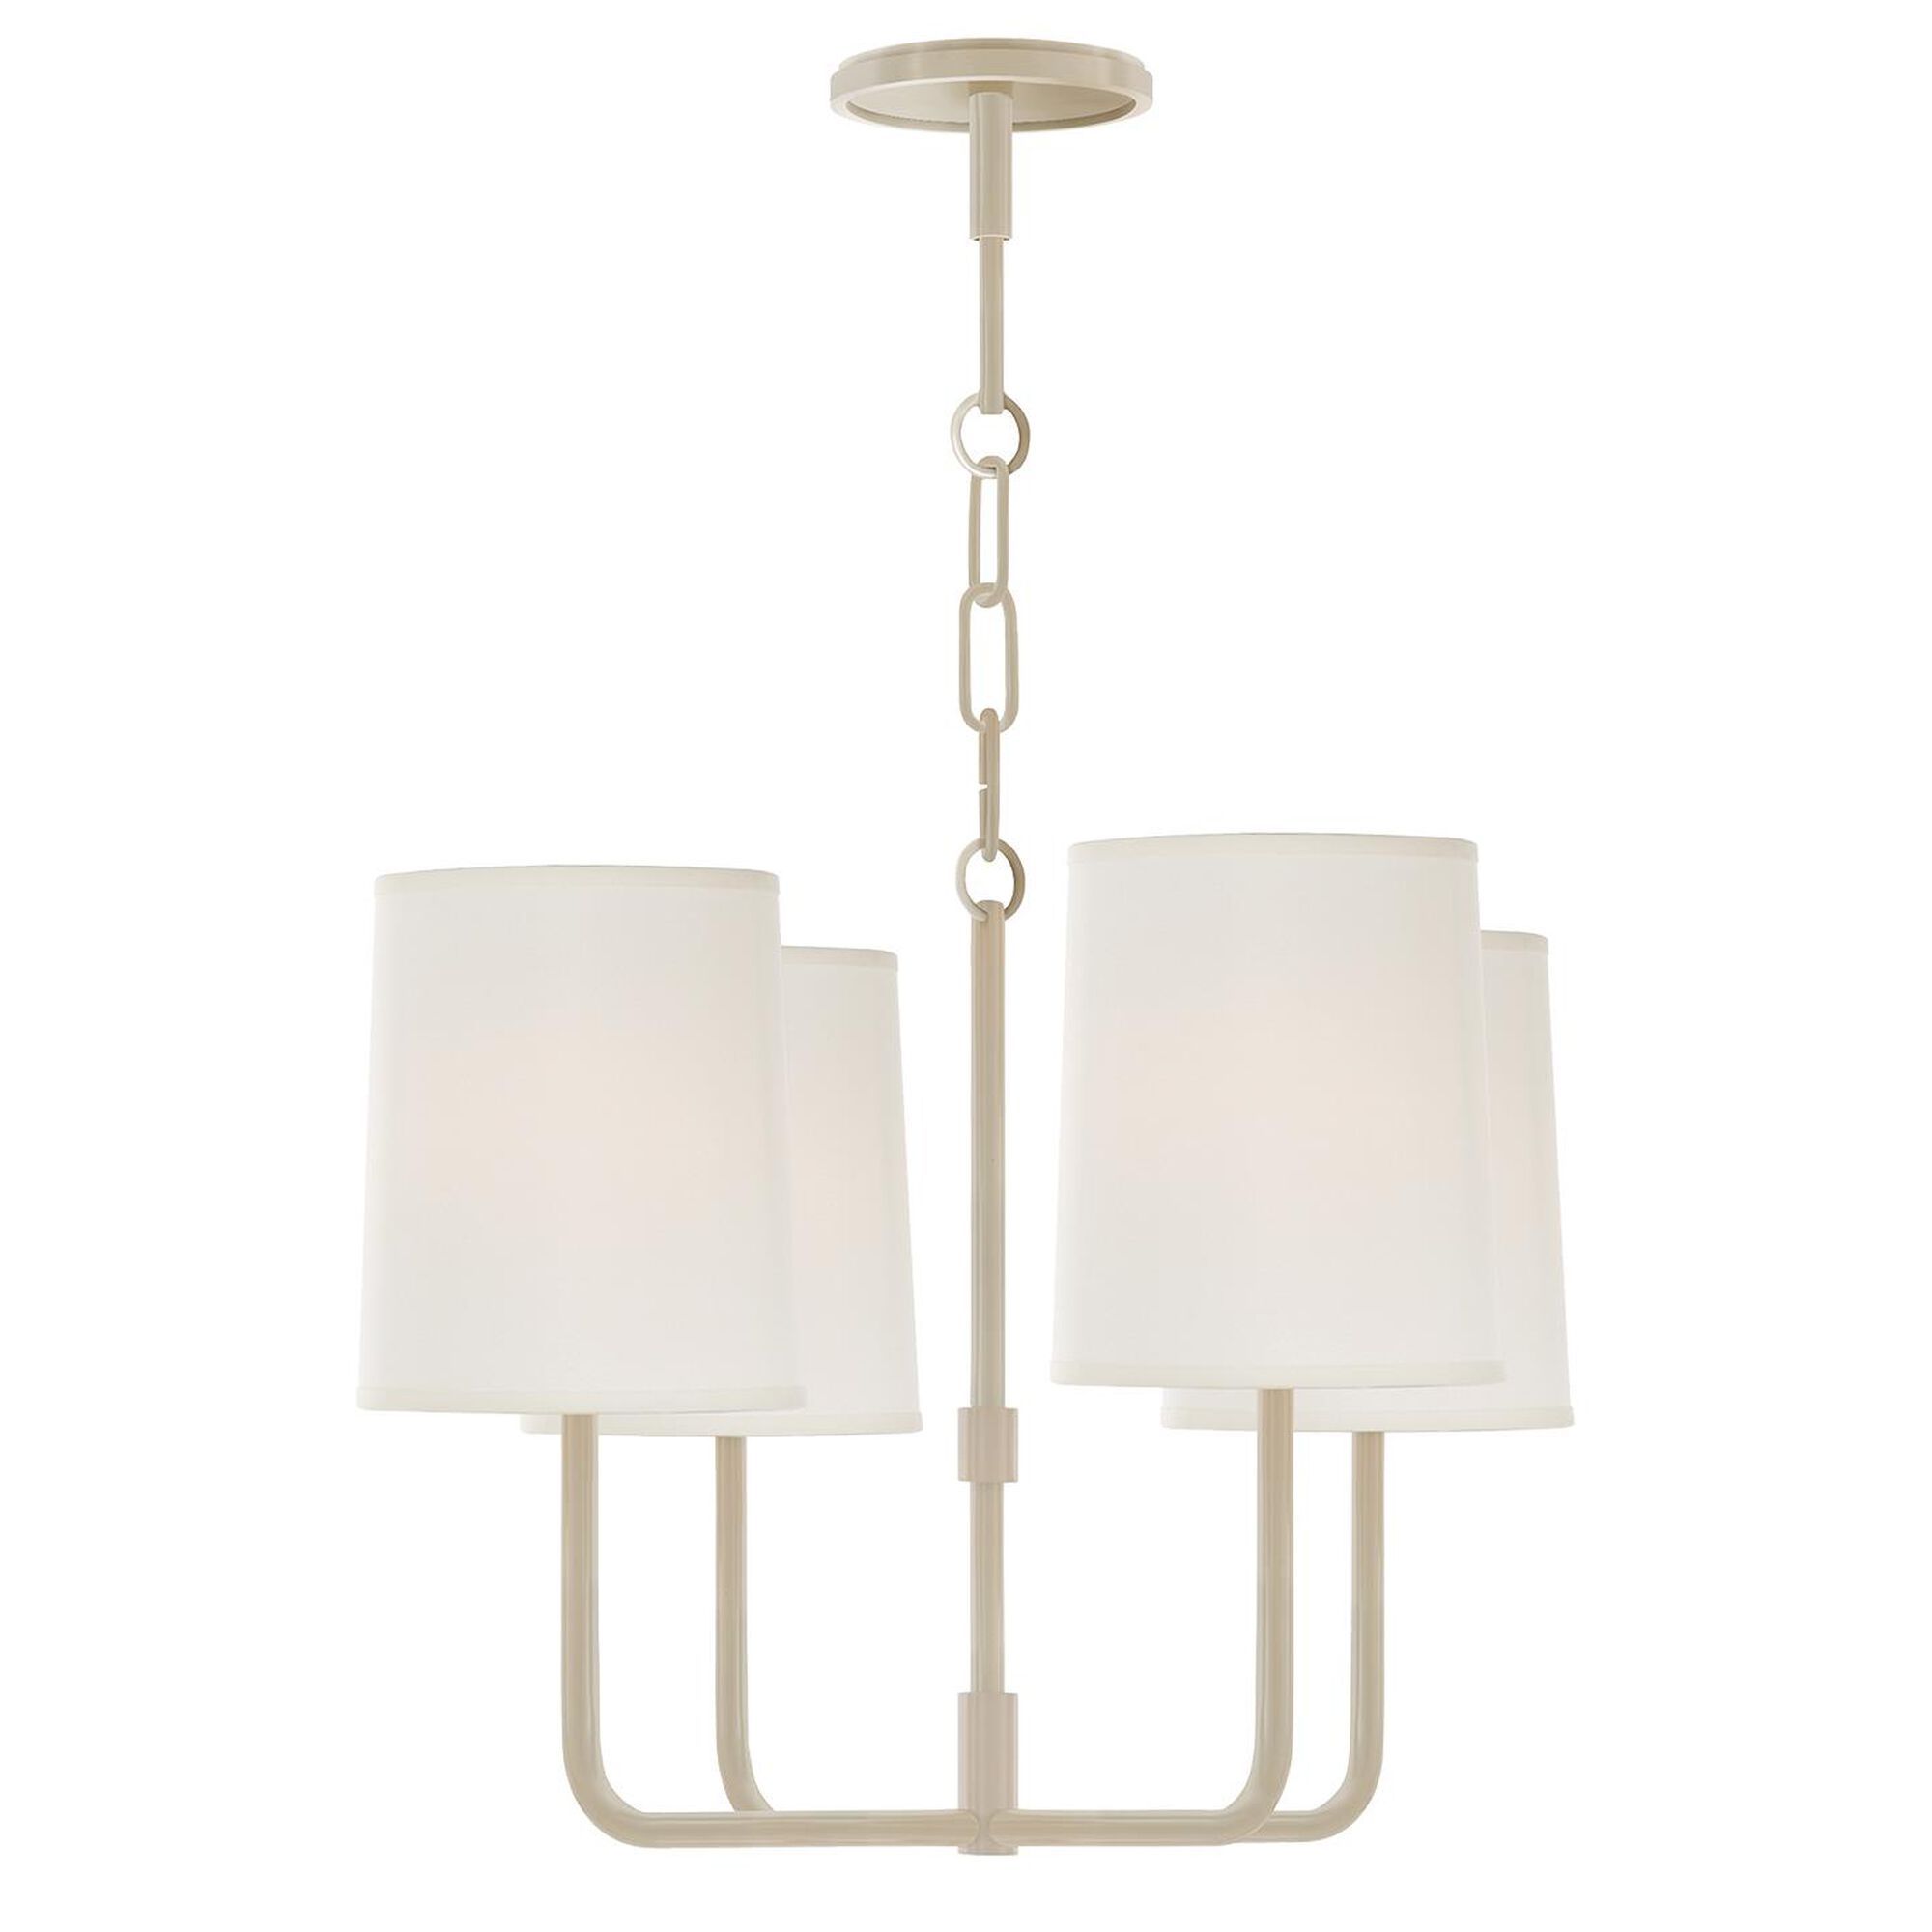 Barbara Barry Go Lightly 19 Inch 4 Light Chandelier by Visual Comfort and Co. | Capitol Lighting 1800lighting.com